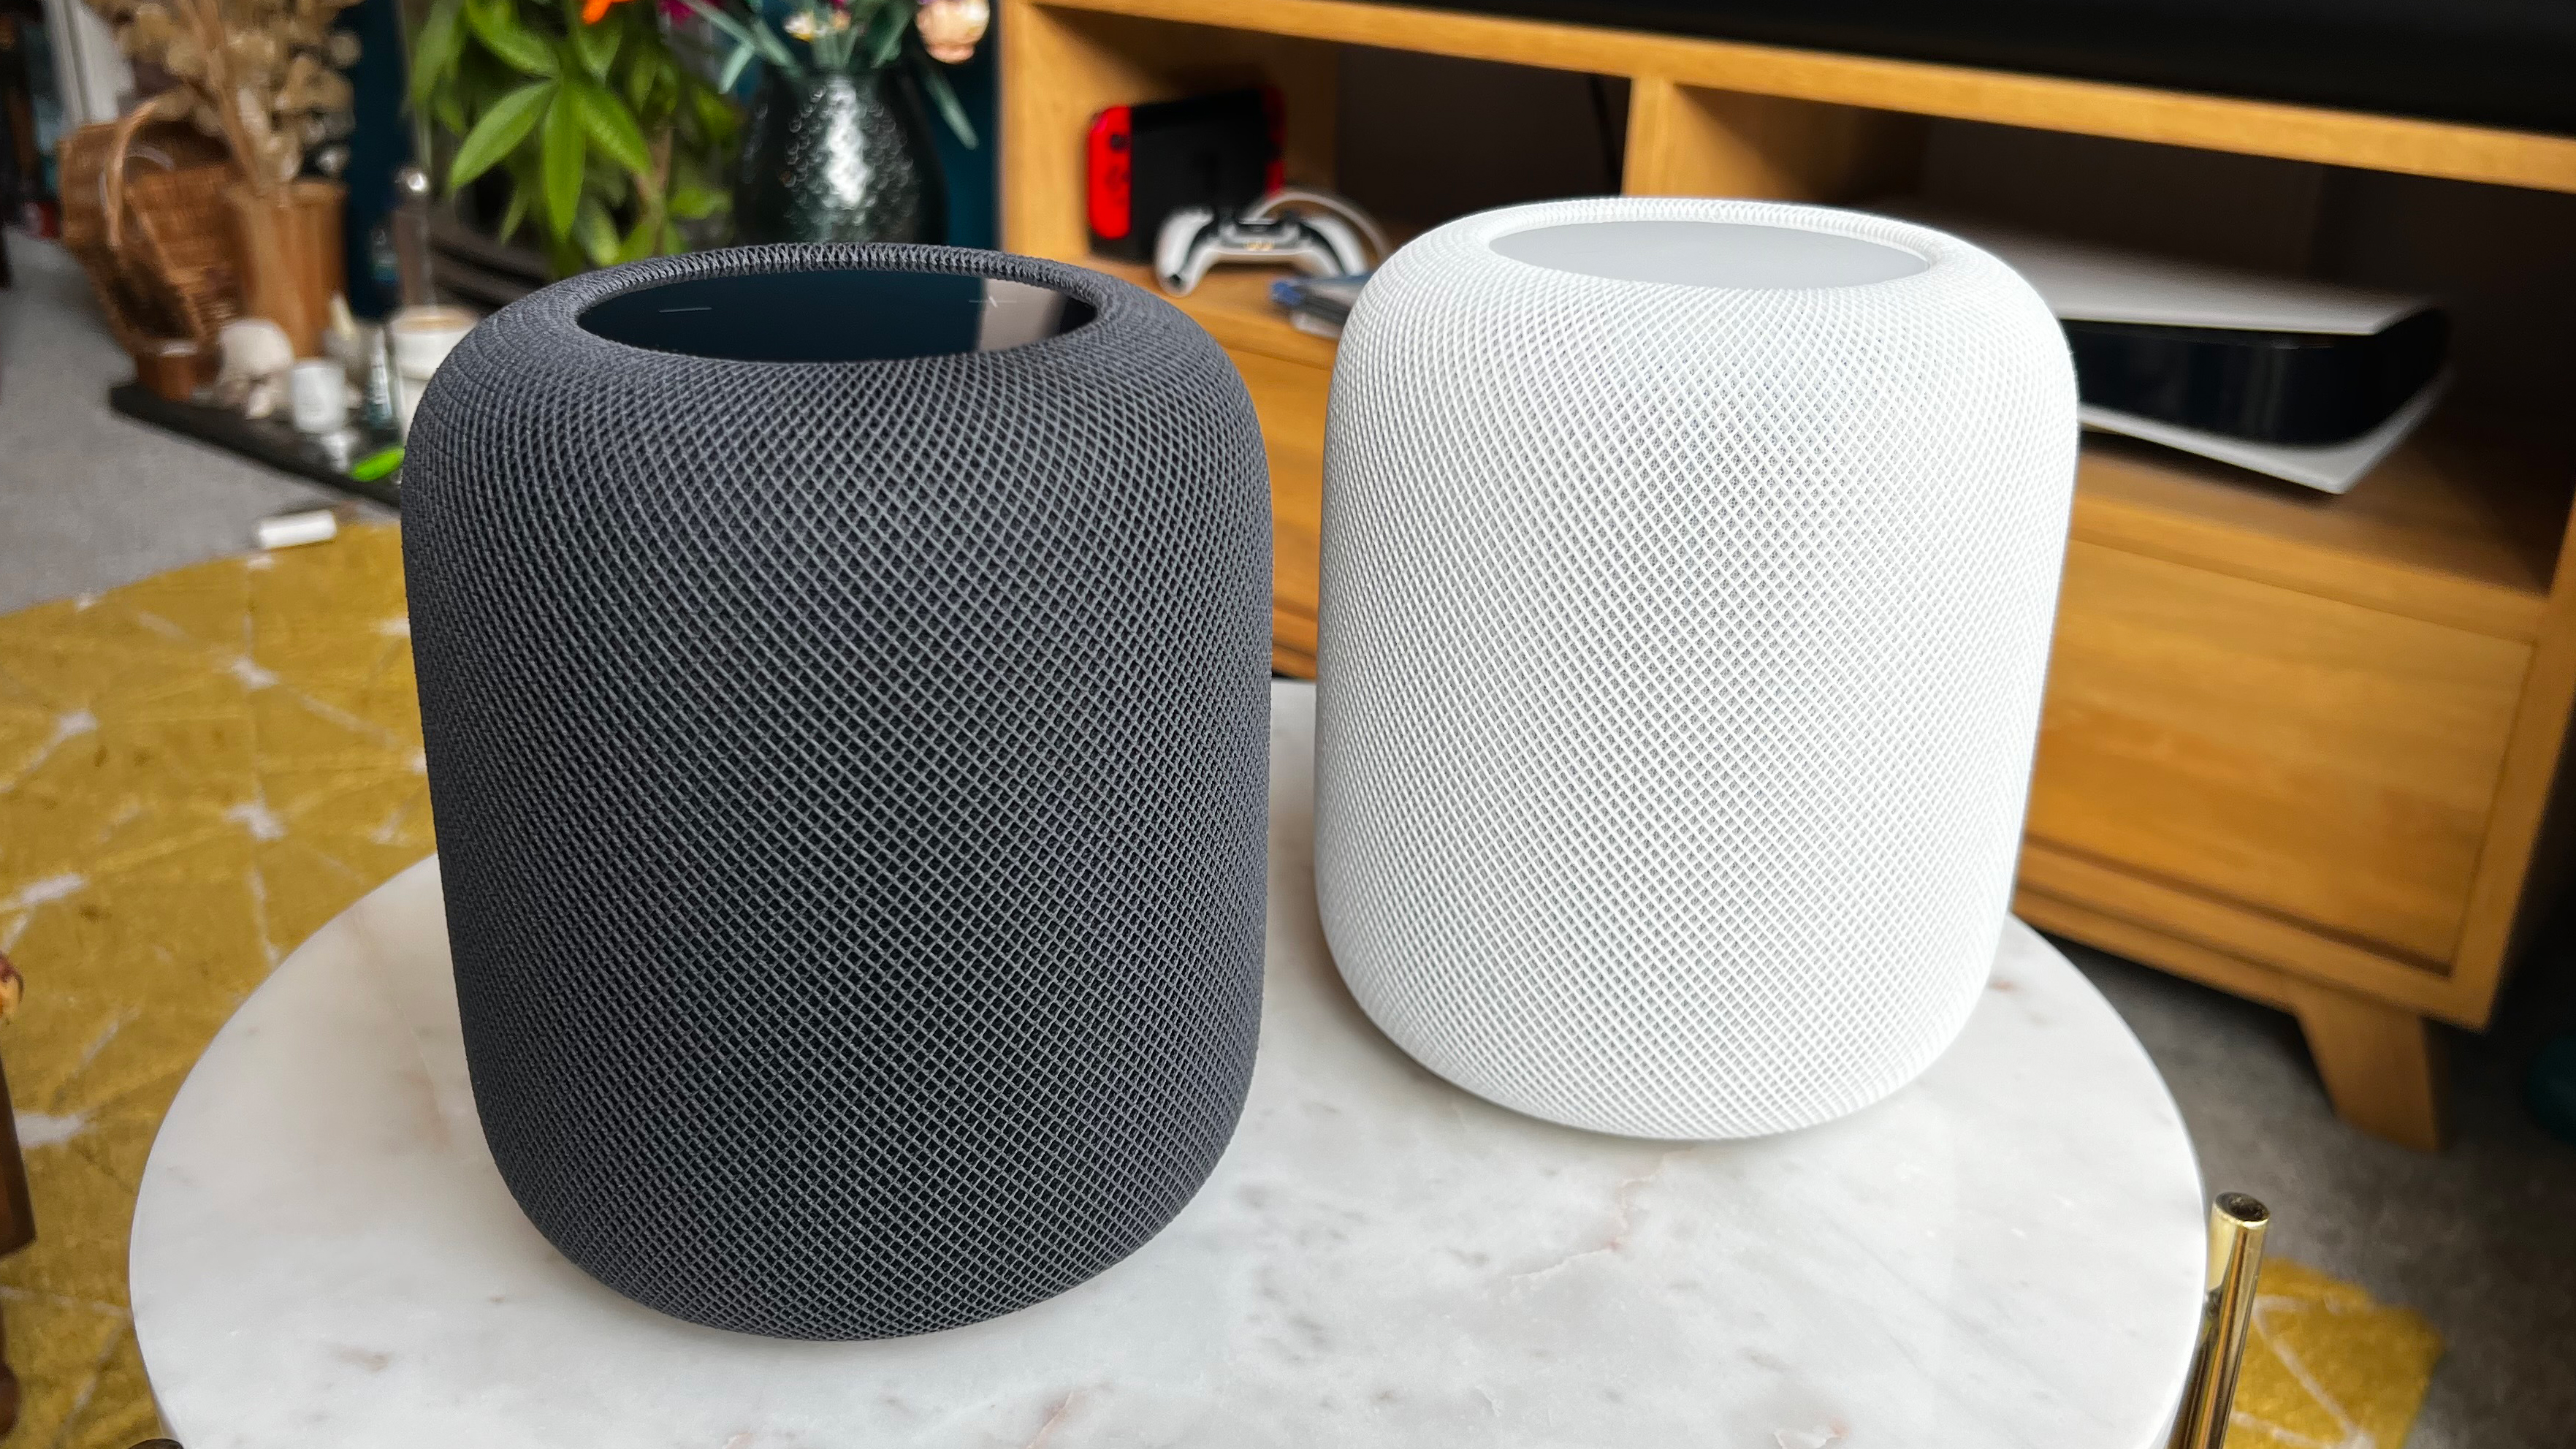 Two Apple HomePod 2 speakers in black and white on a marble shelf in a home